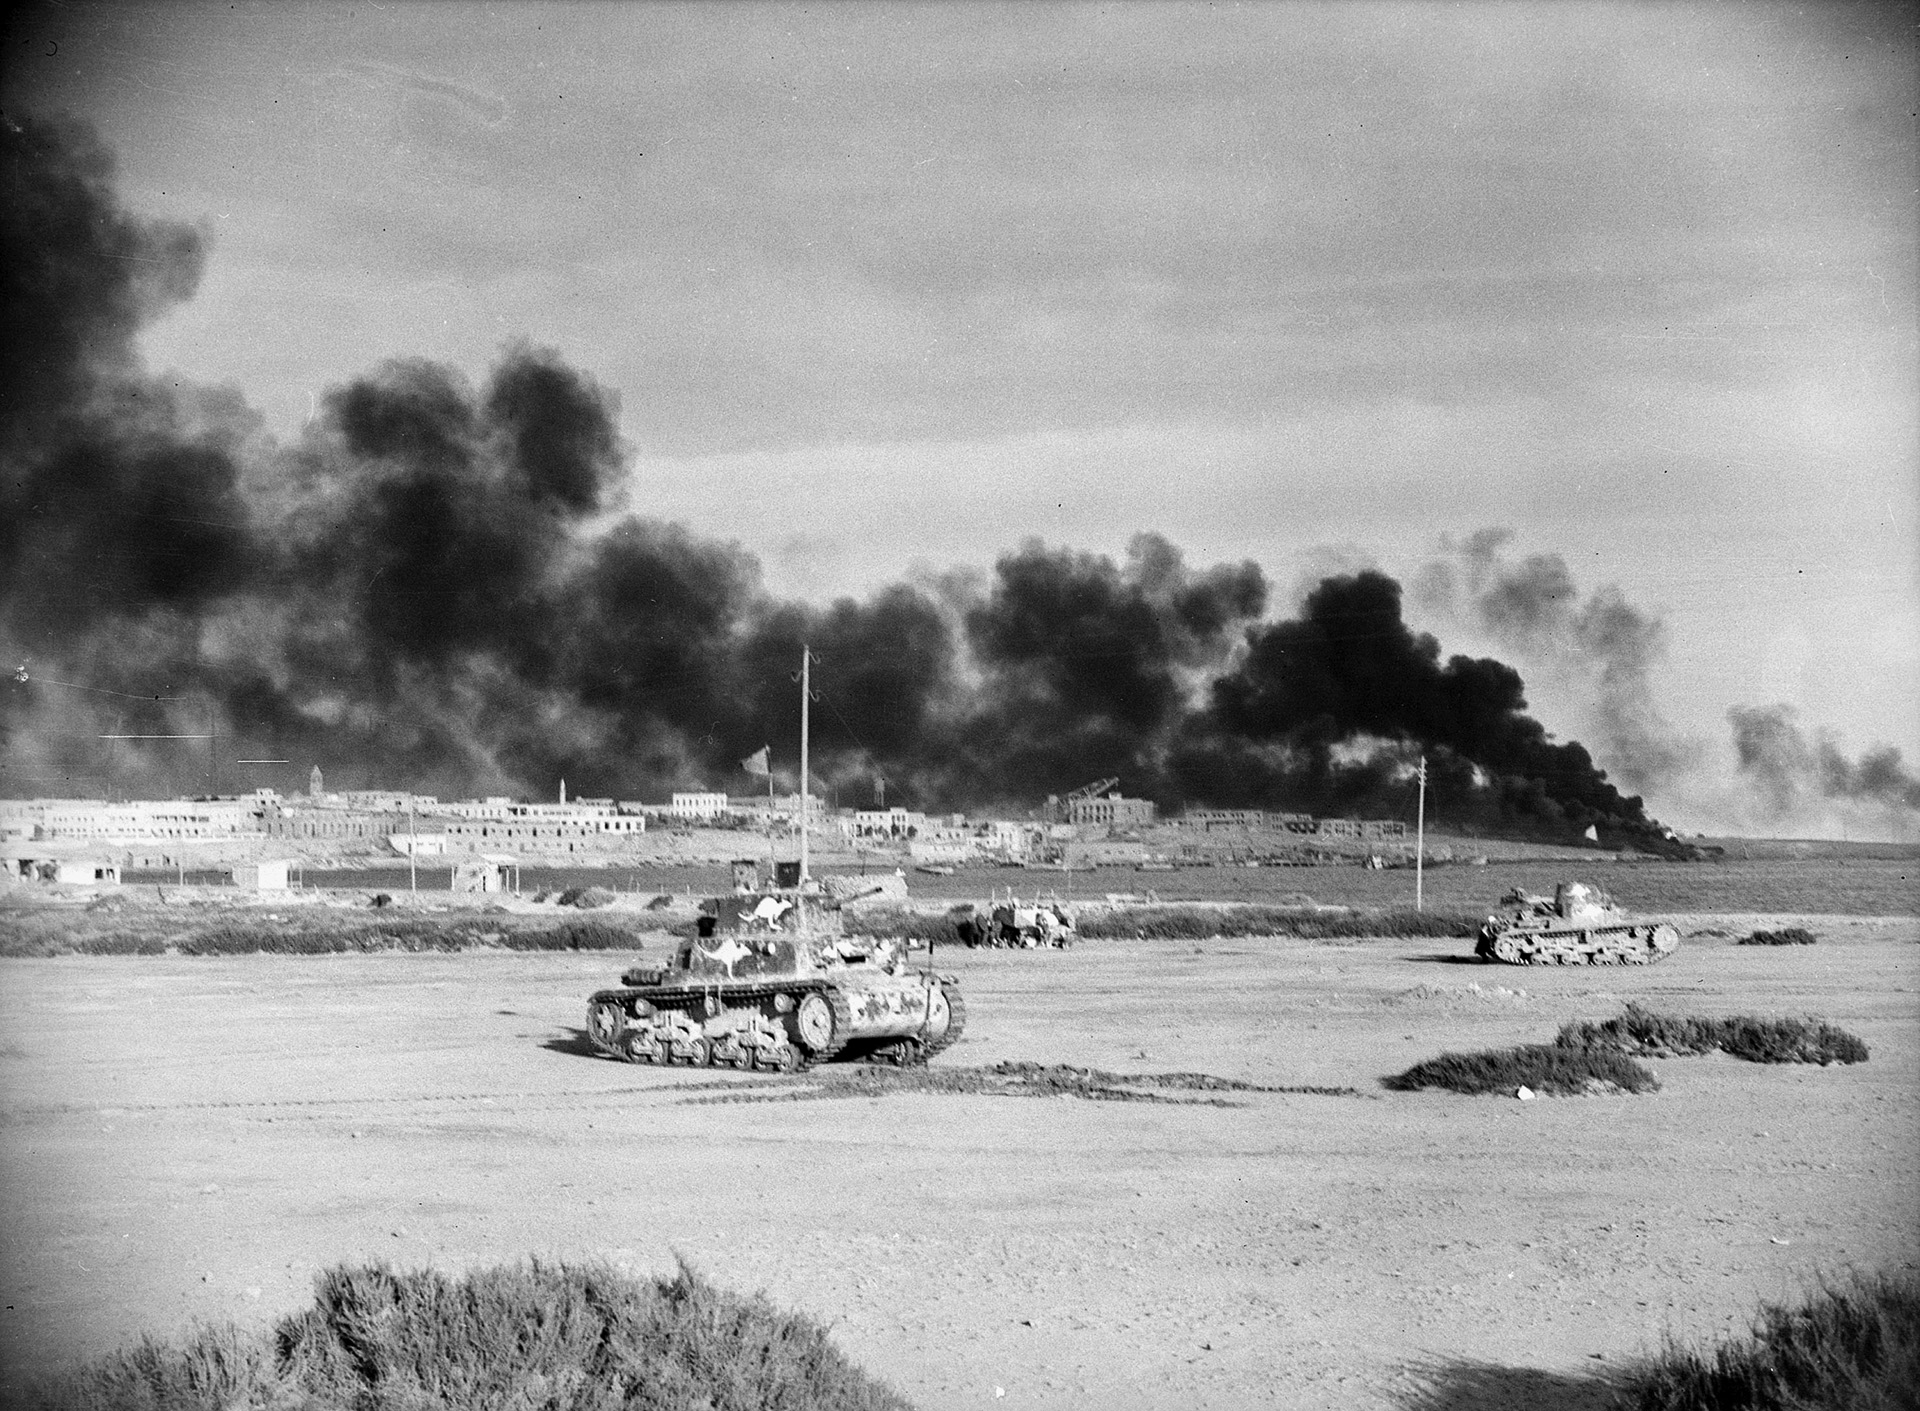 The port of Tobruk burns after its seizure in January 1941 by Allied forces. In the foreground are captured Italian tanks painted with white kangaroos to indicate they belong to the 6th Australian Division.